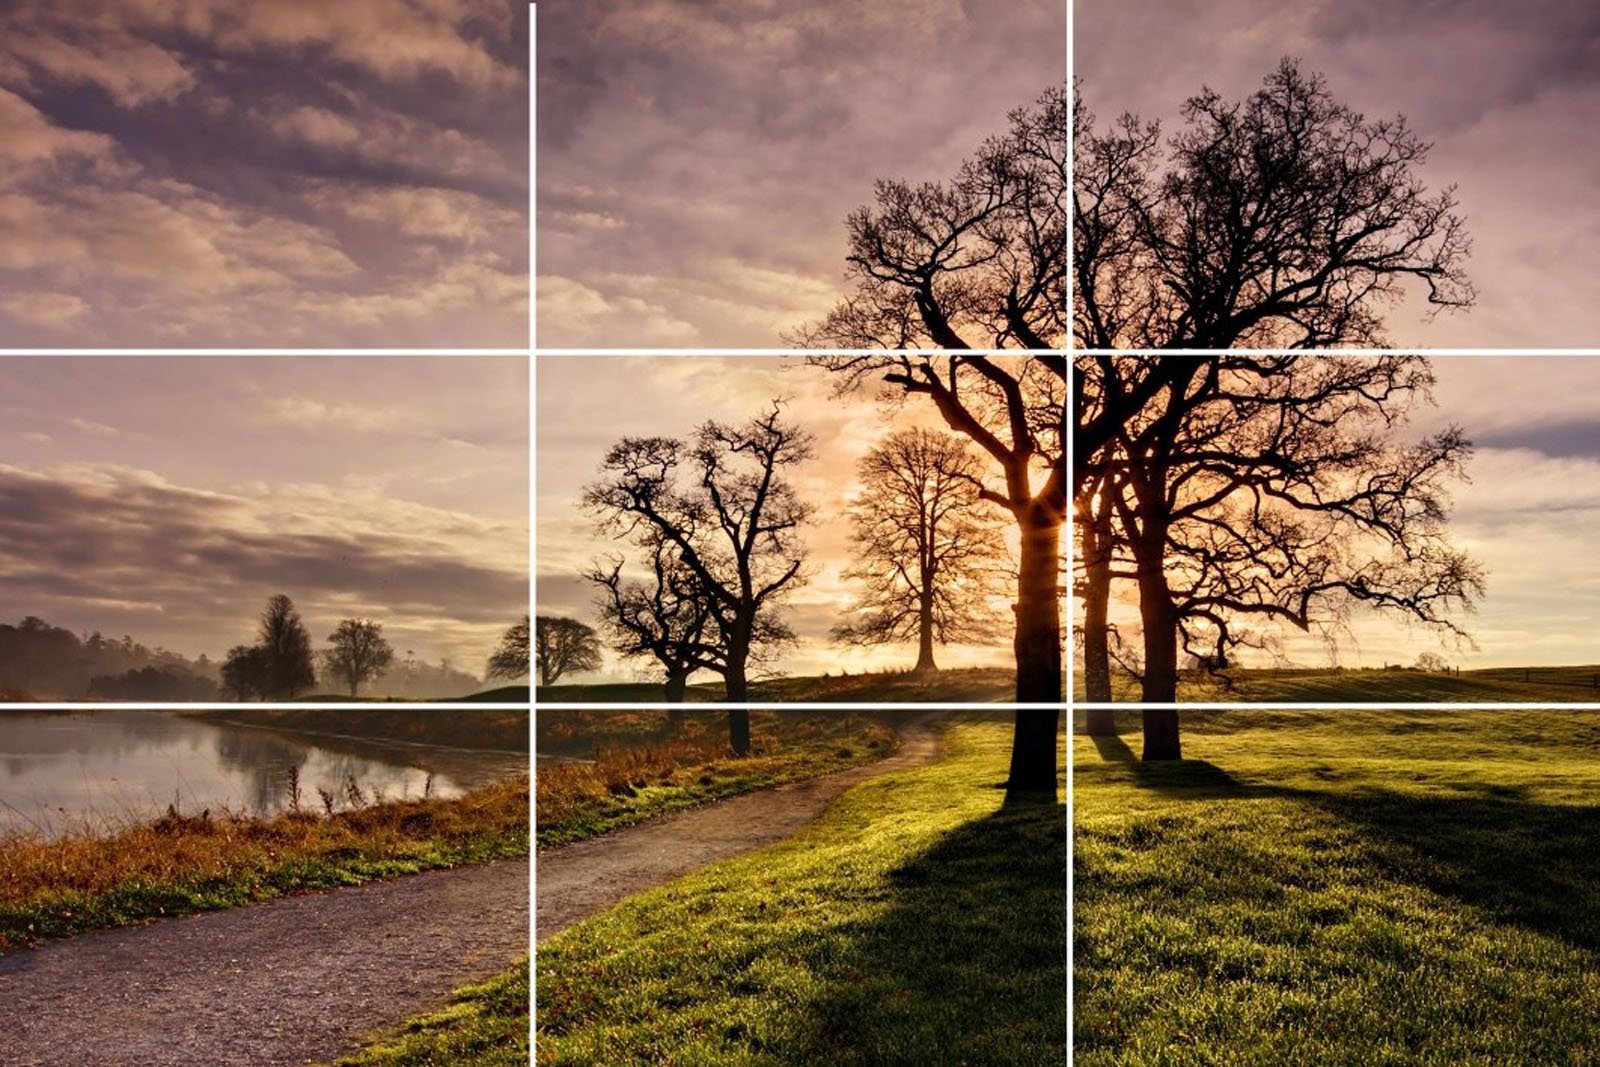 28 Composition Ideas to Help You Take Better Photographs | PetaPixel